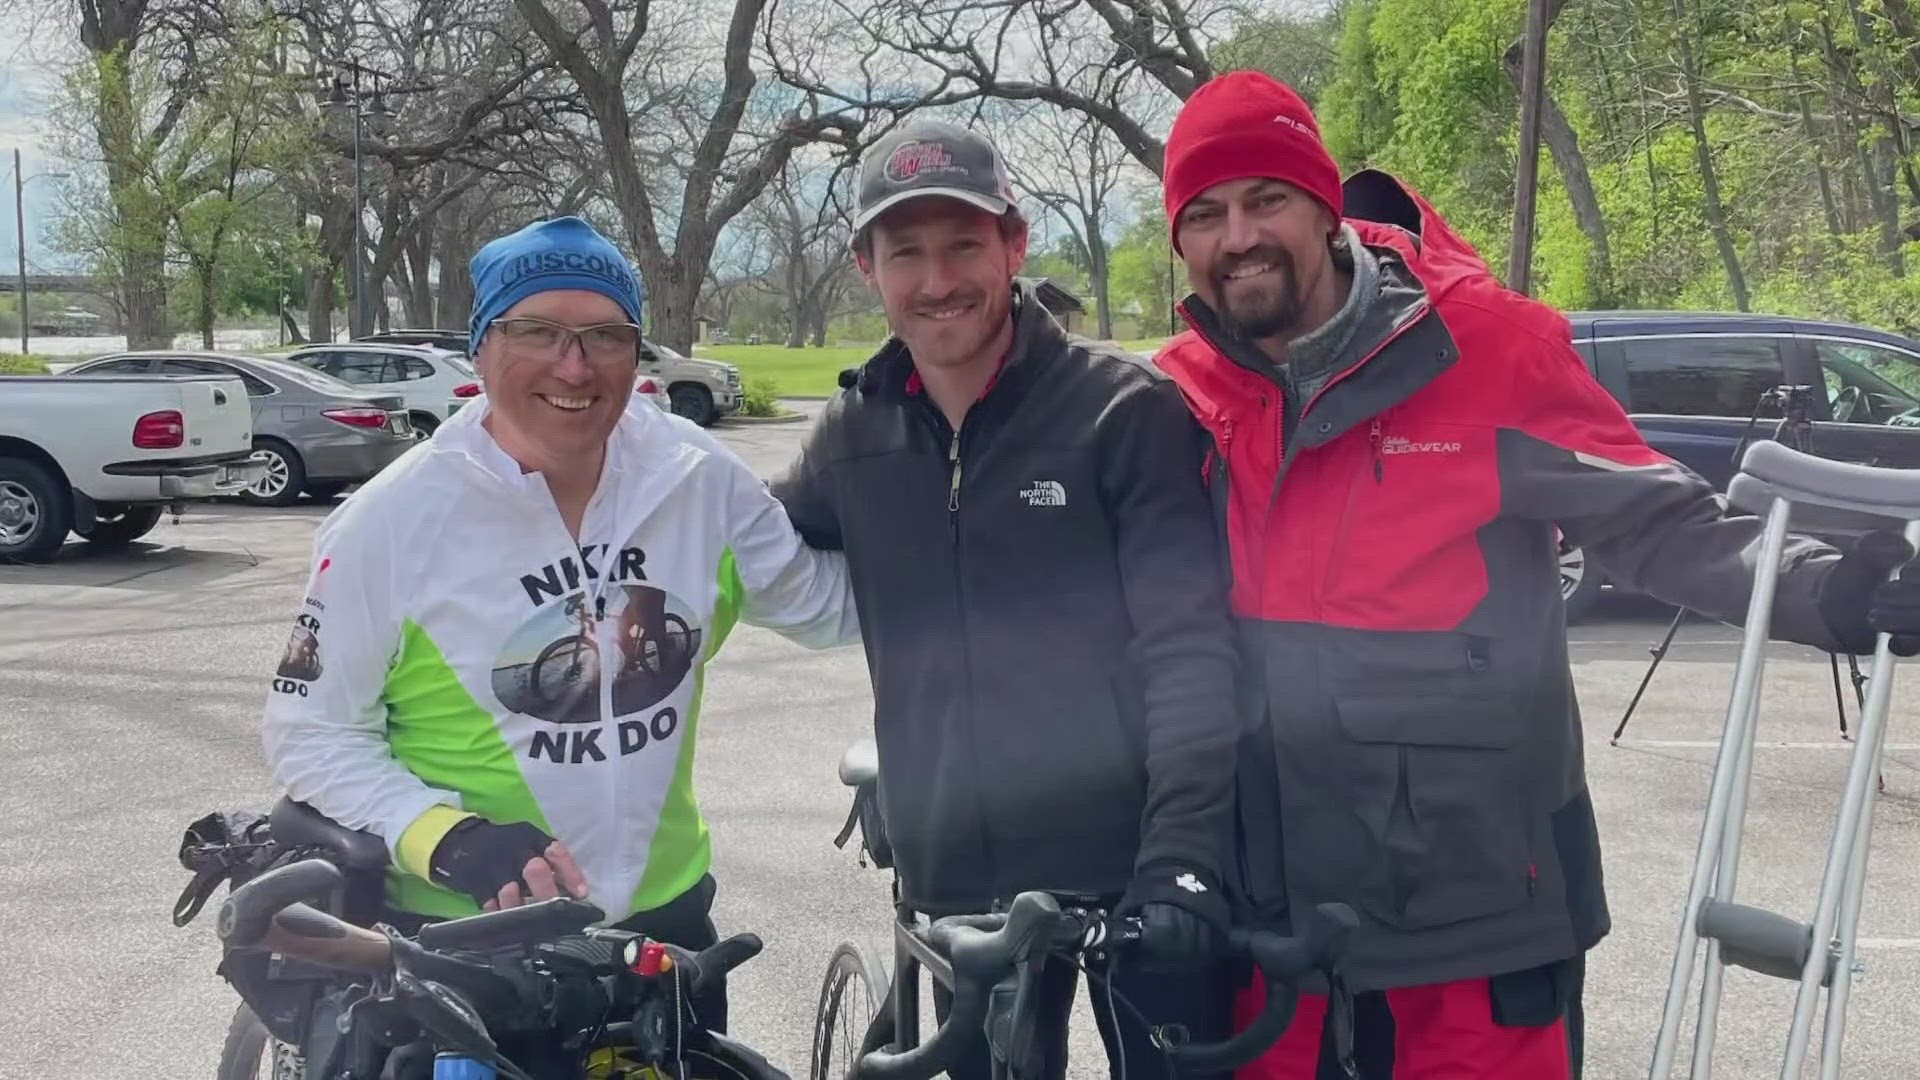 As Mark Scotch cycled his way through the country, he made a stop in Waco where he met two inspiring friends.